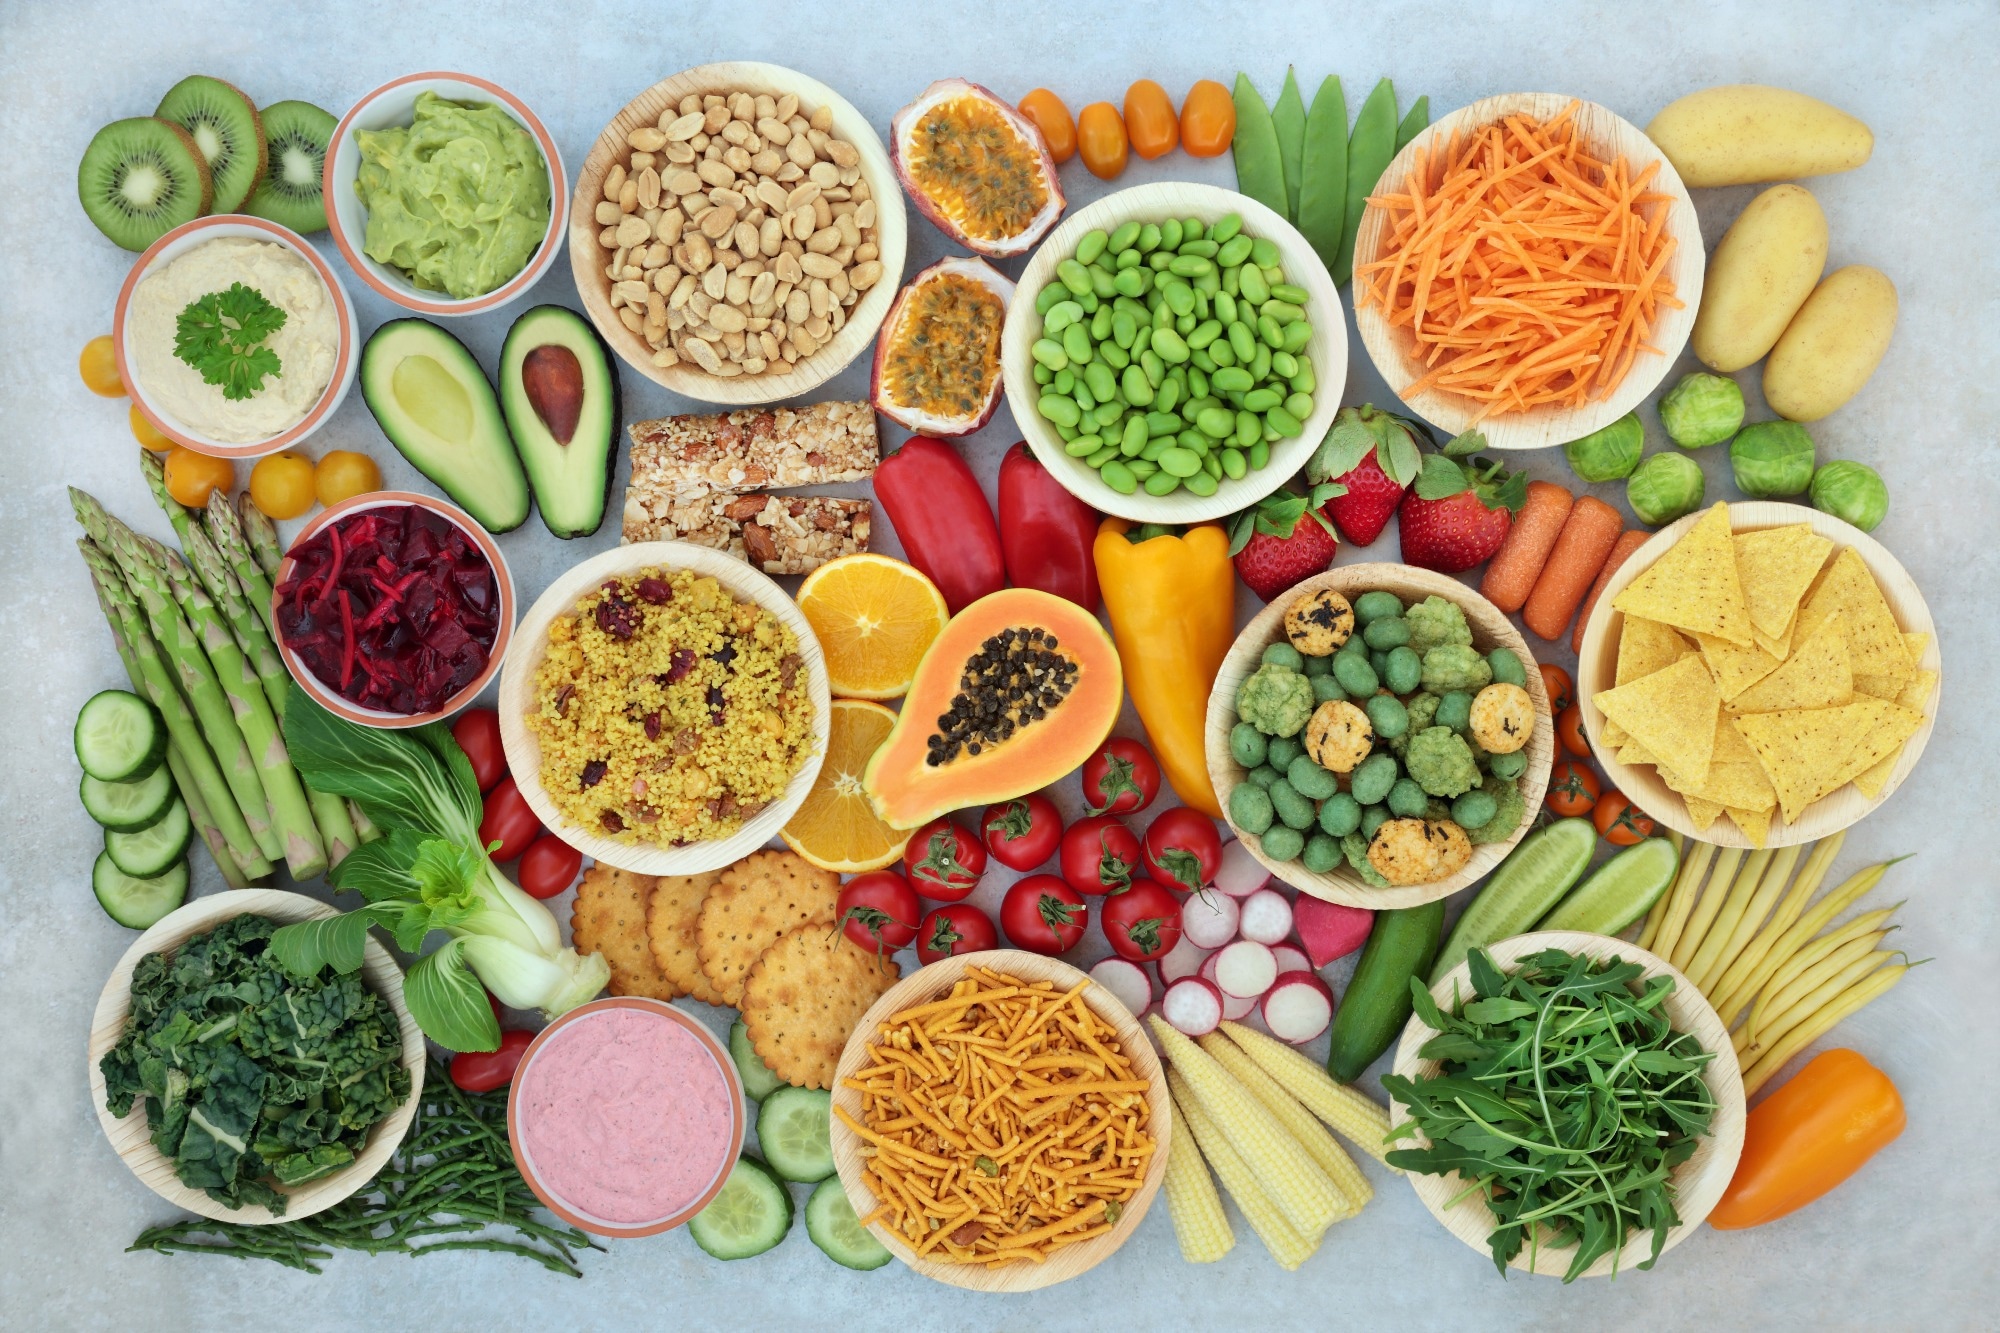 Study: Use of phytosterol-fortified foods to improve LDL cholesterol levels: a systematic review and meta-analysis. Image Credit: marilyn barbone / Shutterstock